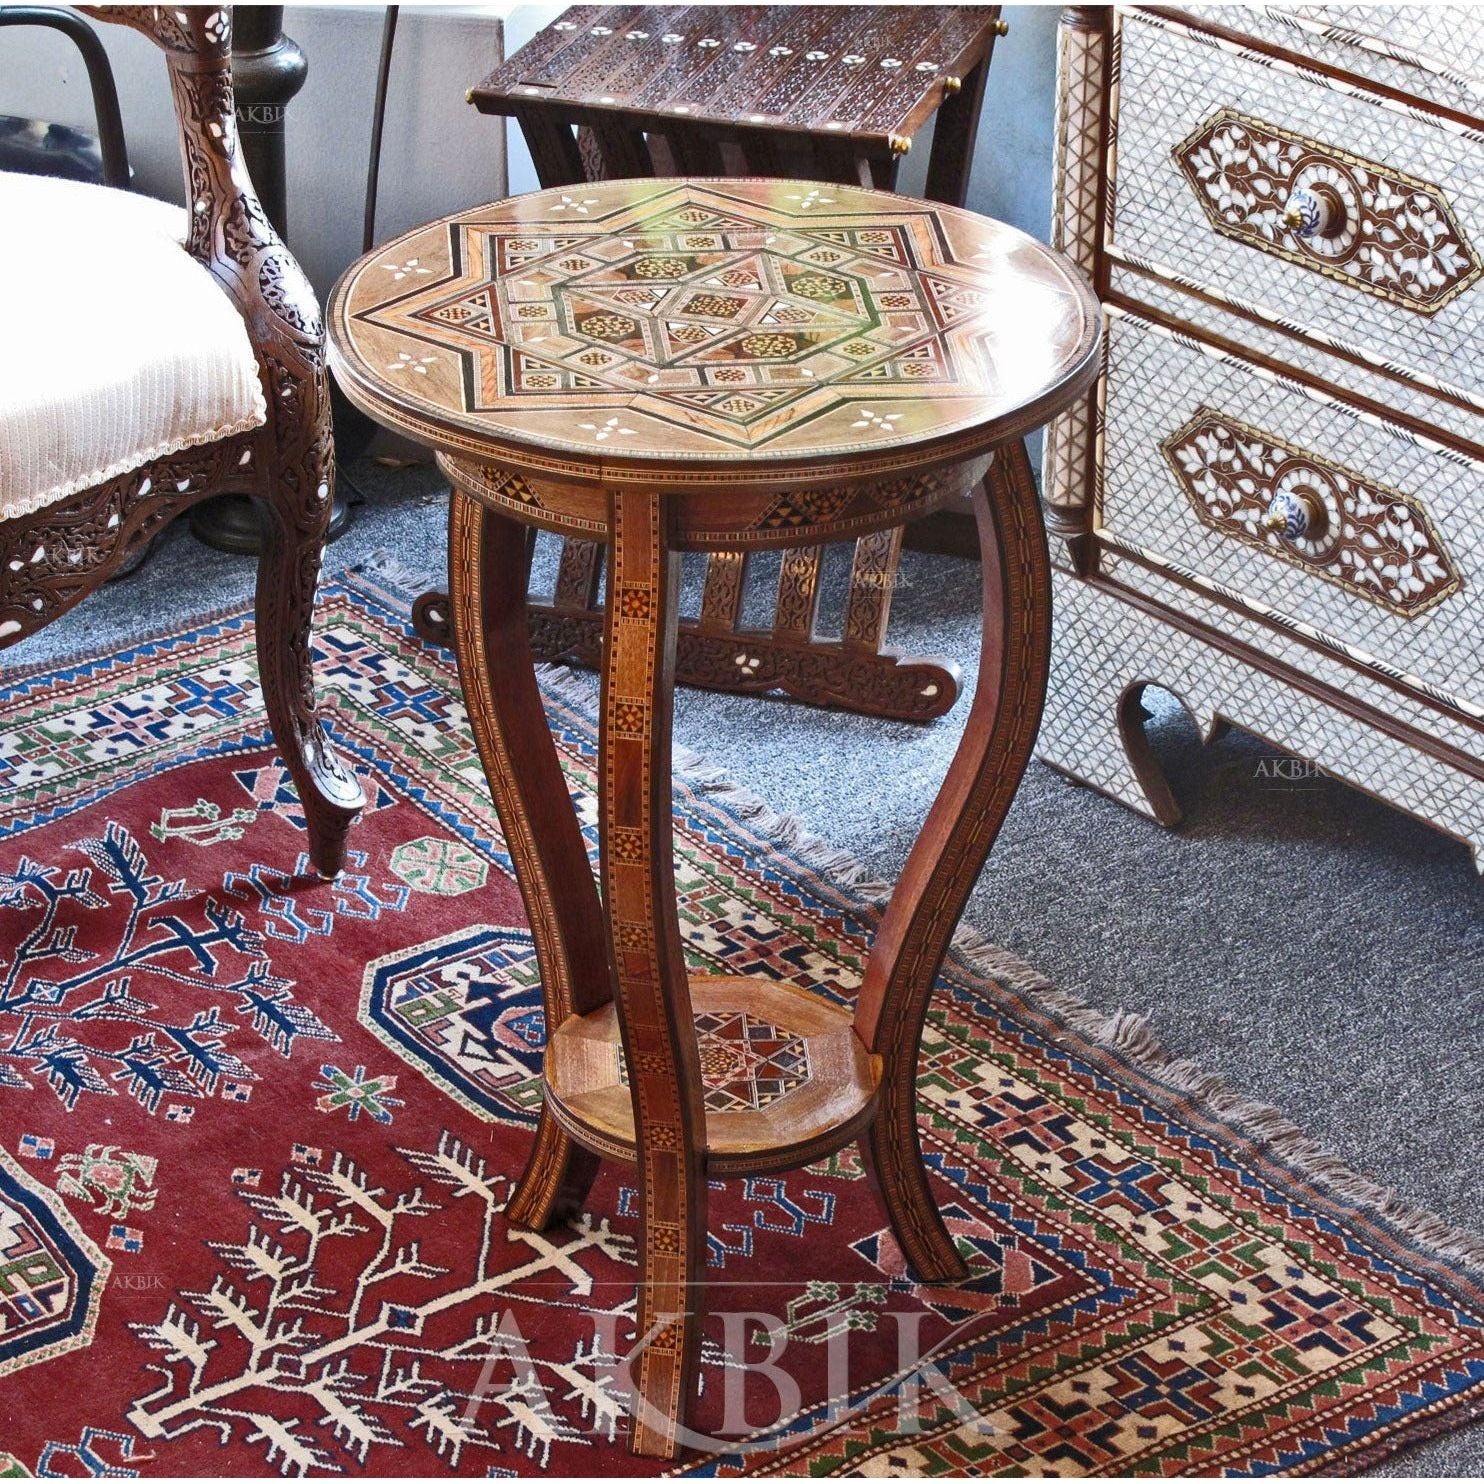 MOSAIC MARQUETRY HAND-MADE SIDE TABLE - AKBIK Furniture & Design